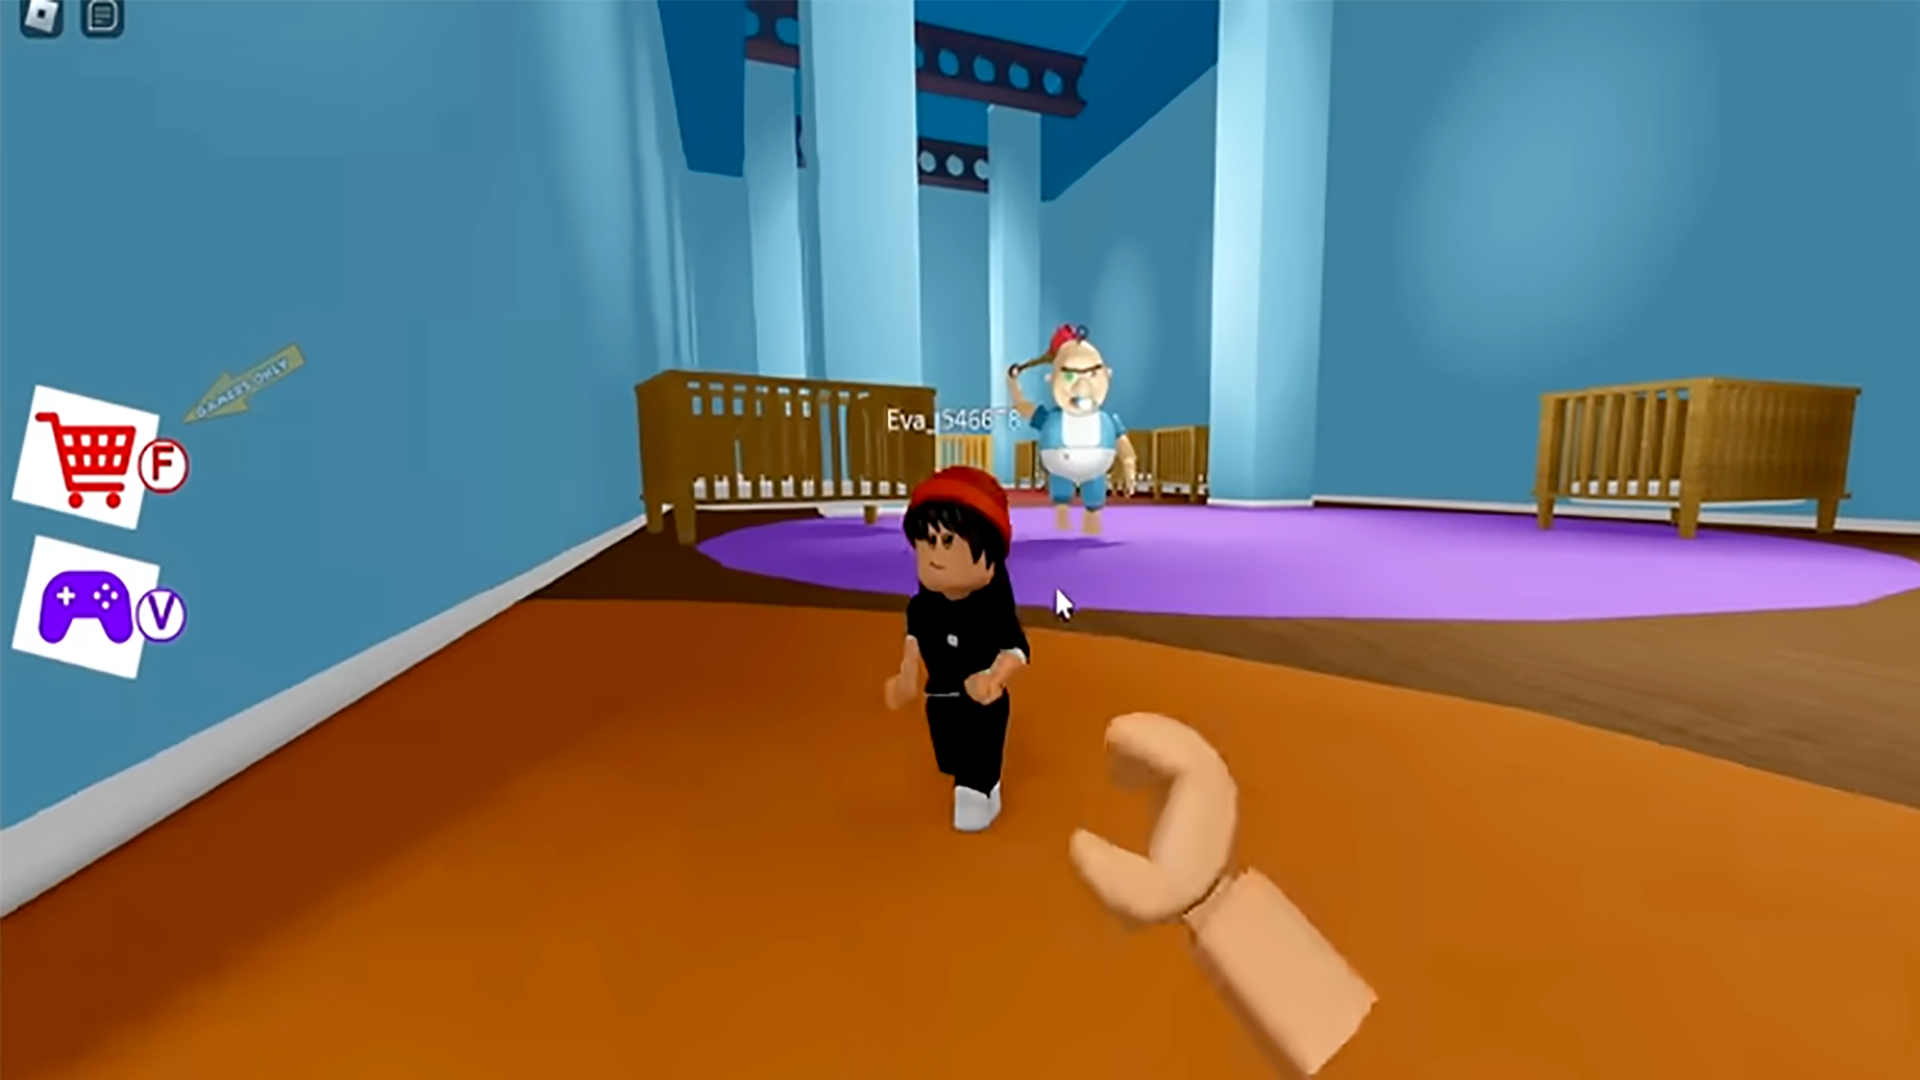 About: Escape the pizzeria obby mod (Google Play version)